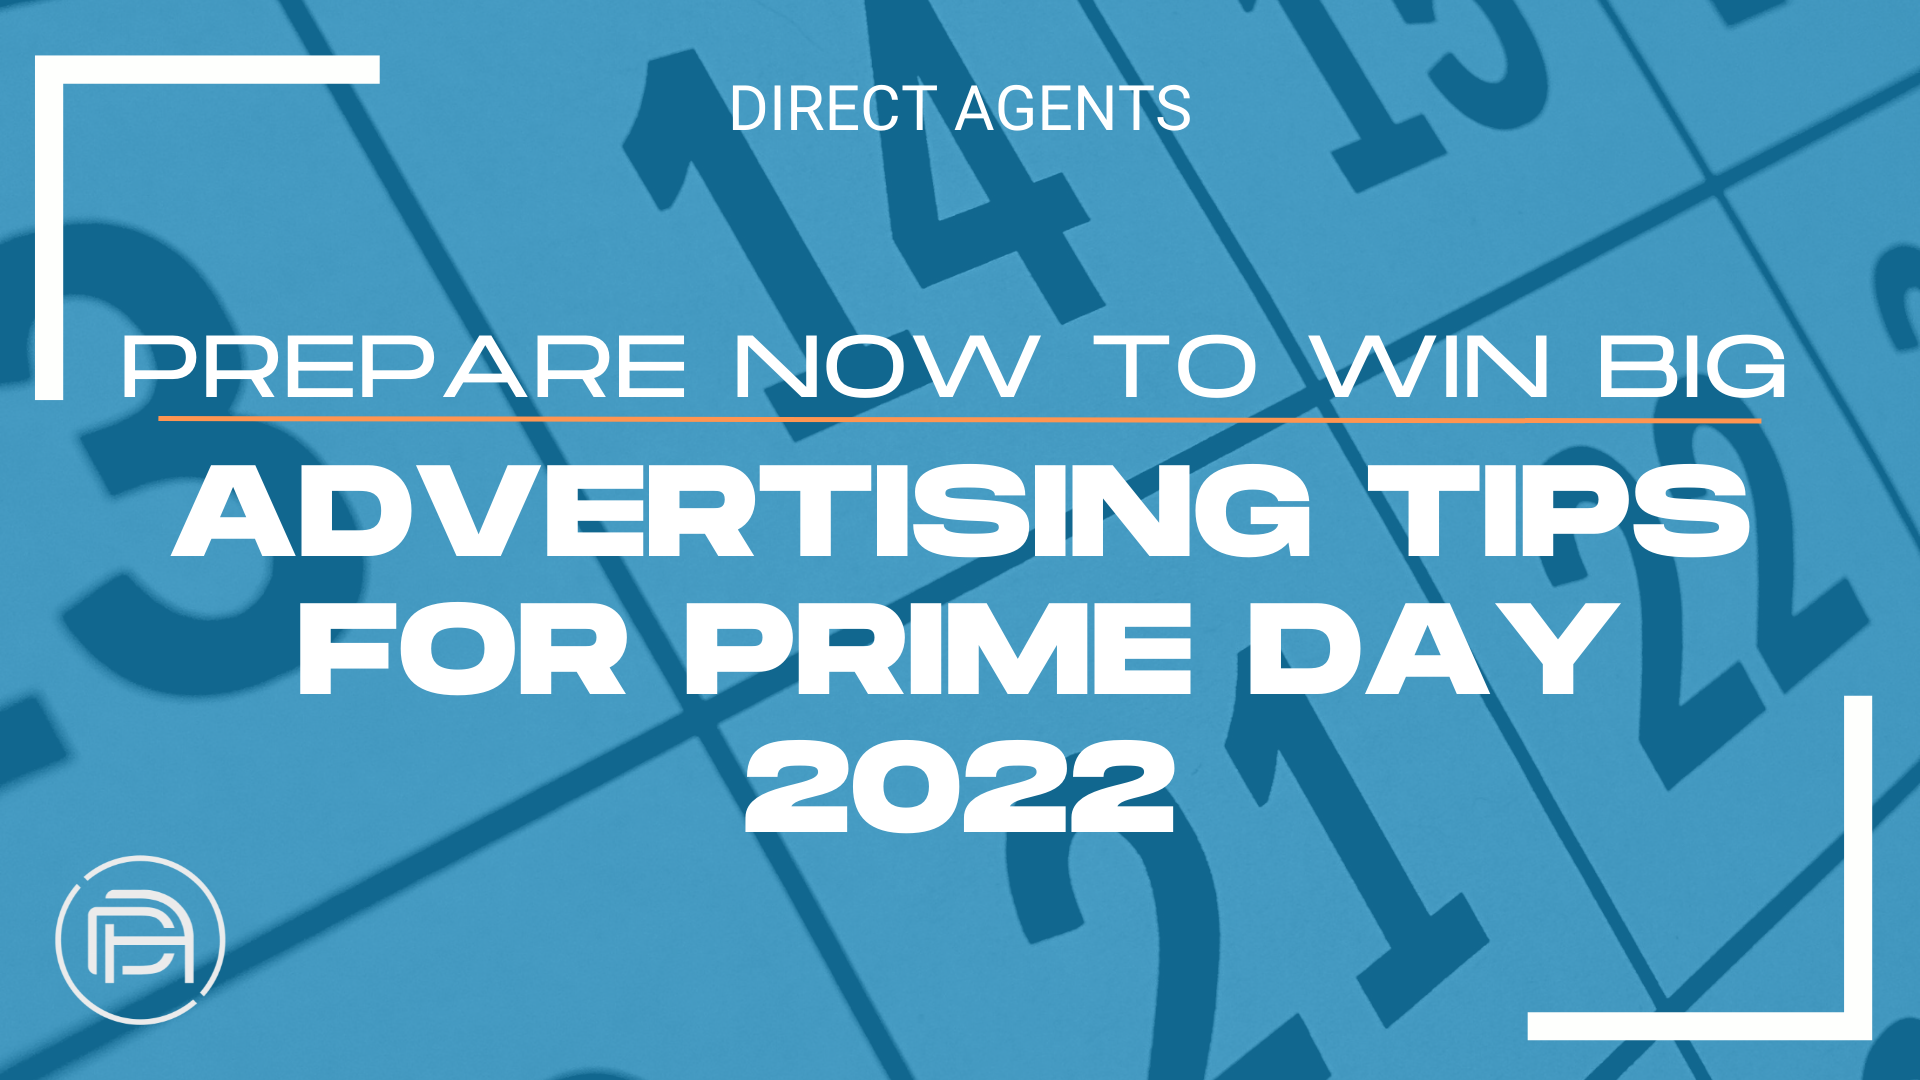 Advertising Tips for Prime Day 2022: Prepare Now to Win Big